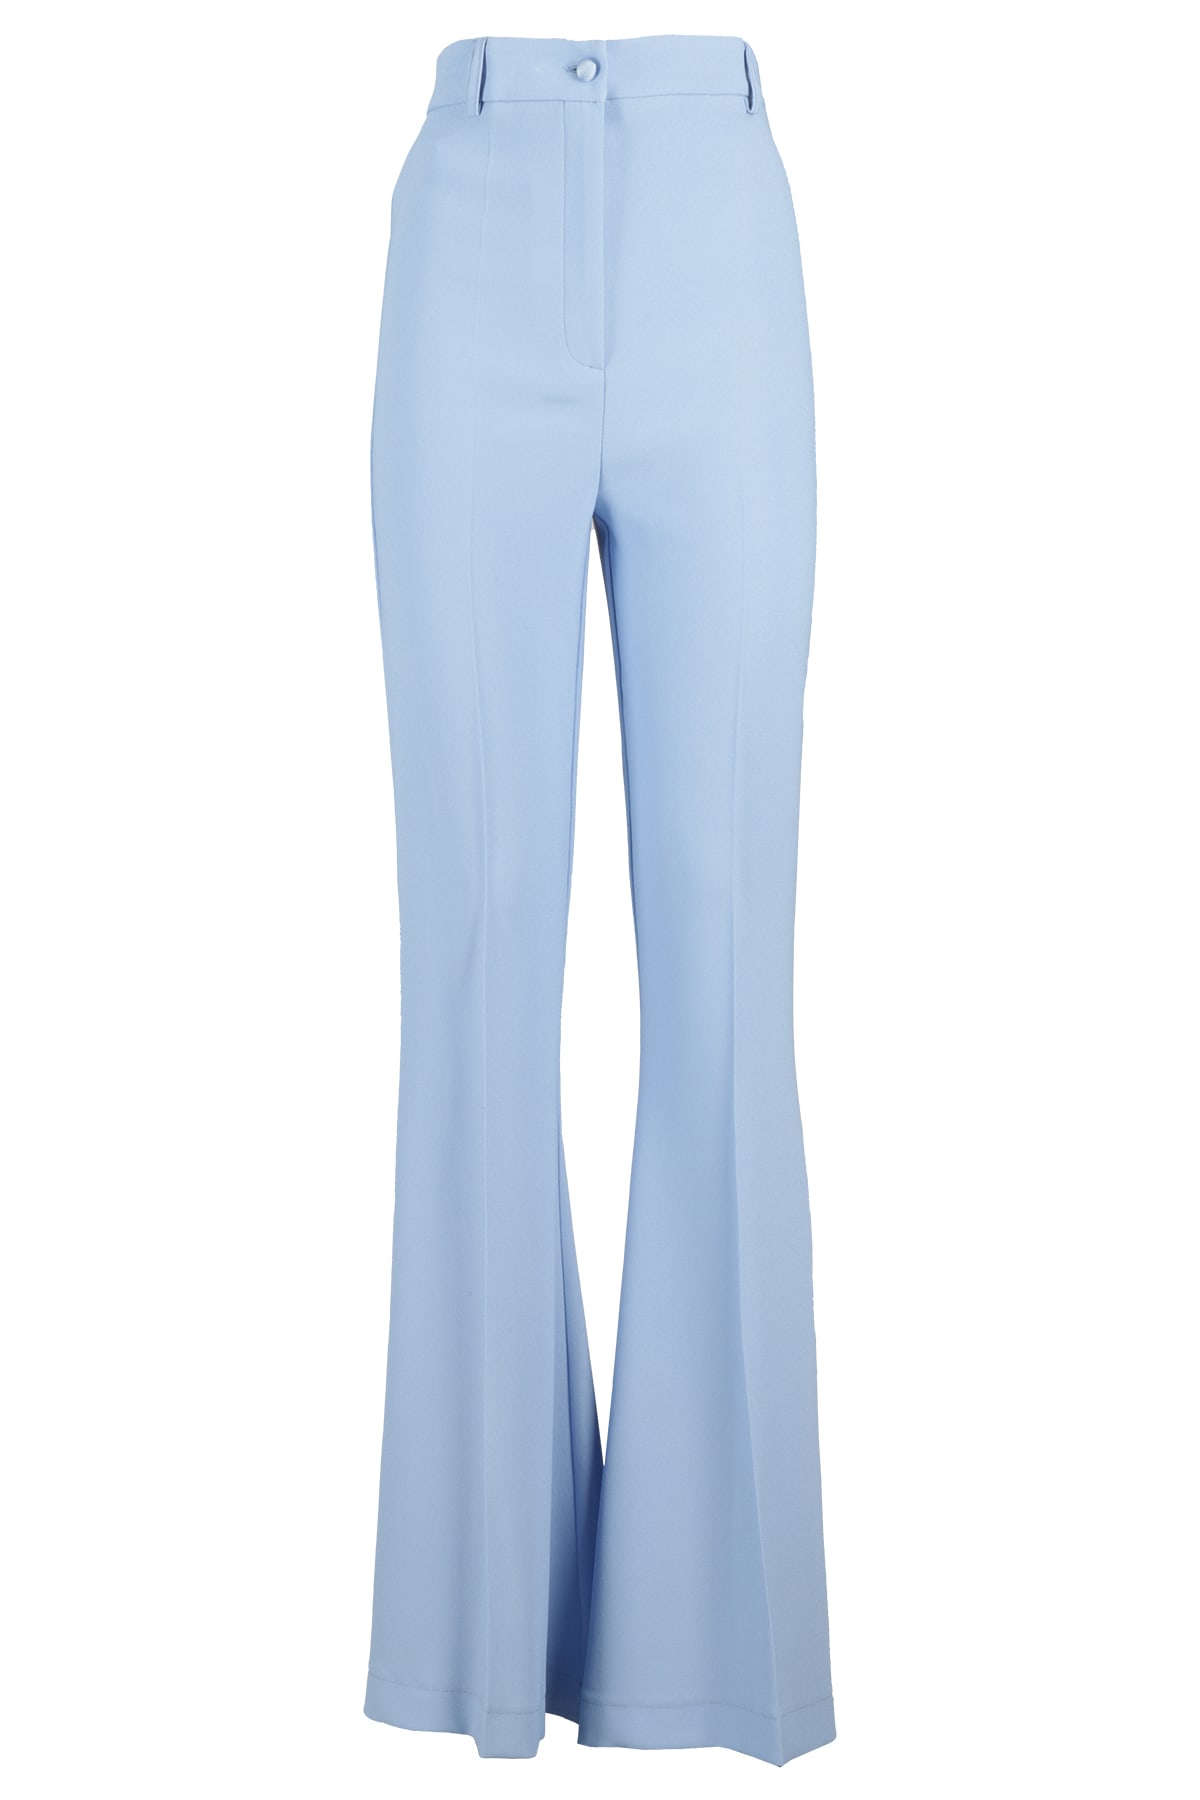 HEBE STUDIO THE BIANCA PANT CADY